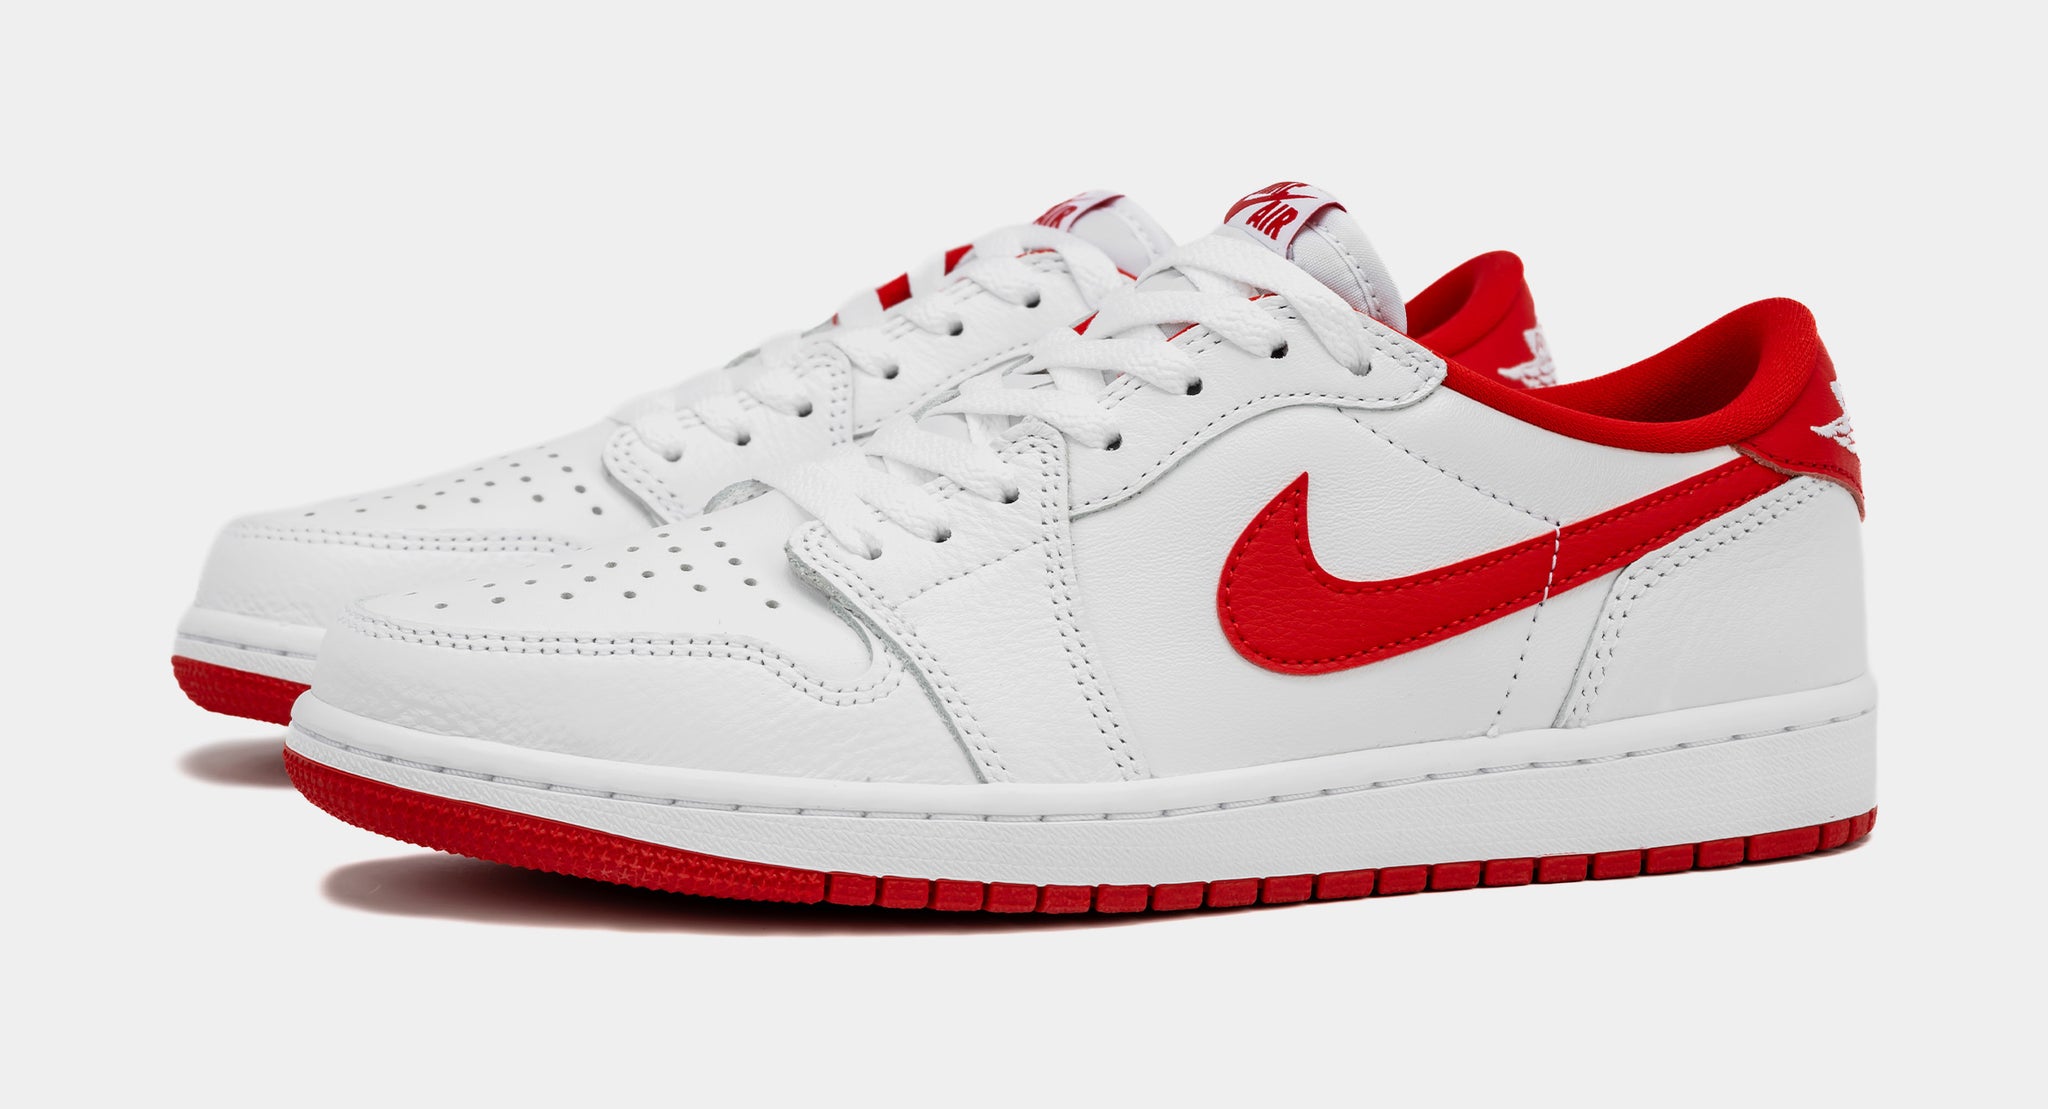 Air Jordan 1 Retro Low OG University Red Mens Lifestyle Shoes (White/Red)  Free Shipping